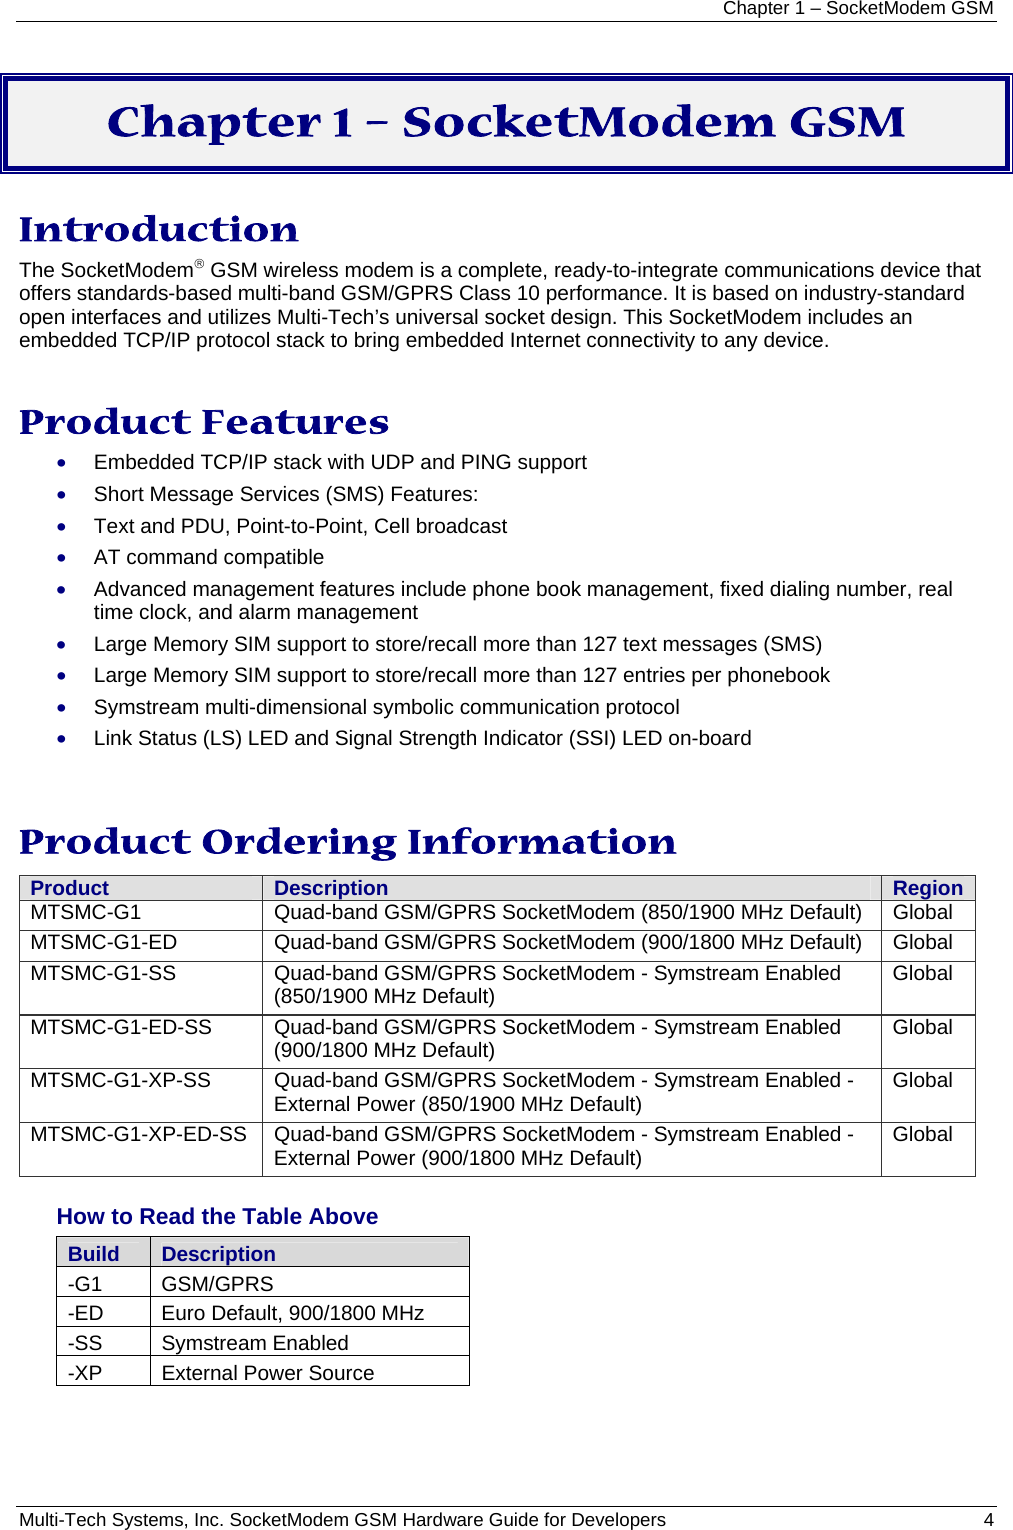 Chapter 1 – SocketModem GSM Multi-Tech Systems, Inc. SocketModem GSM Hardware Guide for Developers   4  Chapter 1 – SocketModem GSM  Introduction The SocketModem® GSM wireless modem is a complete, ready-to-integrate communications device that offers standards-based multi-band GSM/GPRS Class 10 performance. It is based on industry-standard open interfaces and utilizes Multi-Tech’s universal socket design. This SocketModem includes an embedded TCP/IP protocol stack to bring embedded Internet connectivity to any device.  Product Features • Embedded TCP/IP stack with UDP and PING support • Short Message Services (SMS) Features: • Text and PDU, Point-to-Point, Cell broadcast  • AT command compatible • Advanced management features include phone book management, fixed dialing number, real time clock, and alarm management • Large Memory SIM support to store/recall more than 127 text messages (SMS)  • Large Memory SIM support to store/recall more than 127 entries per phonebook • Symstream multi-dimensional symbolic communication protocol • Link Status (LS) LED and Signal Strength Indicator (SSI) LED on-board  Product Ordering Information Product  Description  RegionMTSMC-G1  Quad-band GSM/GPRS SocketModem (850/1900 MHz Default)  Global MTSMC-G1-ED  Quad-band GSM/GPRS SocketModem (900/1800 MHz Default)  Global MTSMC-G1-SS  Quad-band GSM/GPRS SocketModem - Symstream Enabled (850/1900 MHz Default)  Global MTSMC-G1-ED-SS  Quad-band GSM/GPRS SocketModem - Symstream Enabled (900/1800 MHz Default)  Global MTSMC-G1-XP-SS  Quad-band GSM/GPRS SocketModem - Symstream Enabled - External Power (850/1900 MHz Default)  Global MTSMC-G1-XP-ED-SS  Quad-band GSM/GPRS SocketModem - Symstream Enabled - External Power (900/1800 MHz Default)  Global  How to Read the Table Above Build  Description -G1 GSM/GPRS -ED  Euro Default, 900/1800 MHz -SS Symstream Enabled -XP  External Power Source   